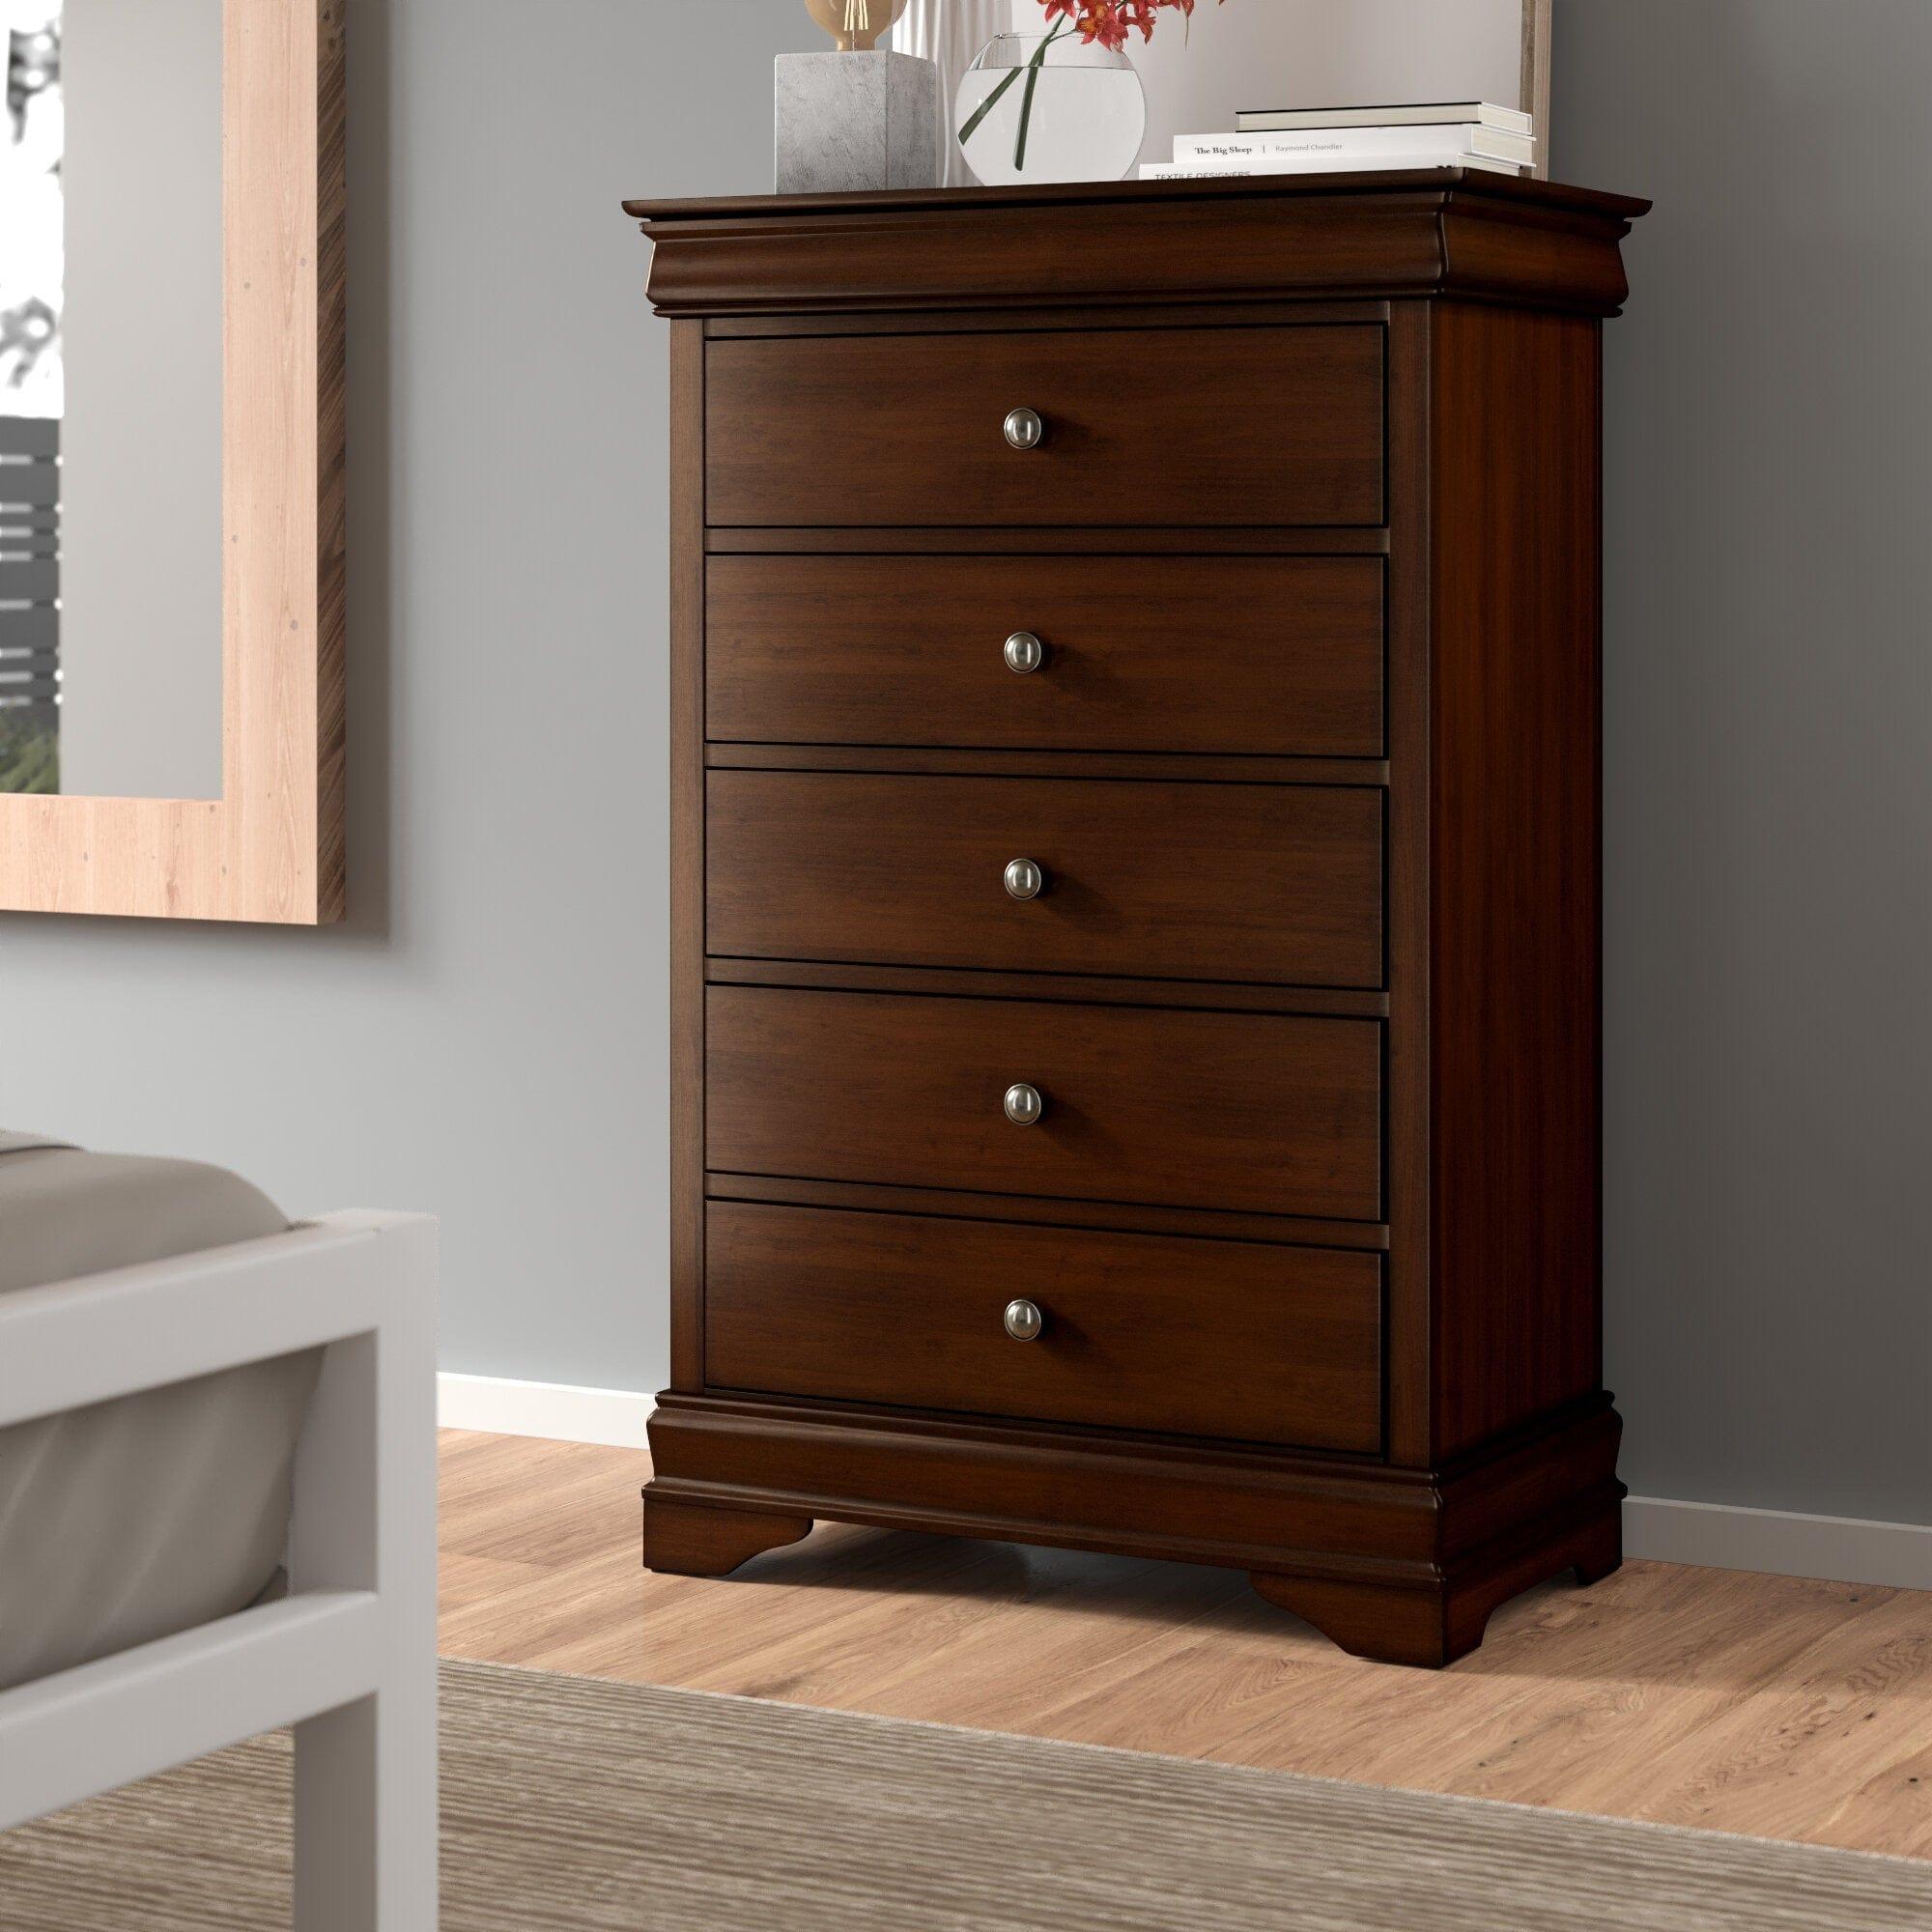 Shop Louis Philippe Style 1pc Chest of Drawers Brown Cherry Finish Okume Veneer Bedroom Furniture Mademoiselle Home Decor